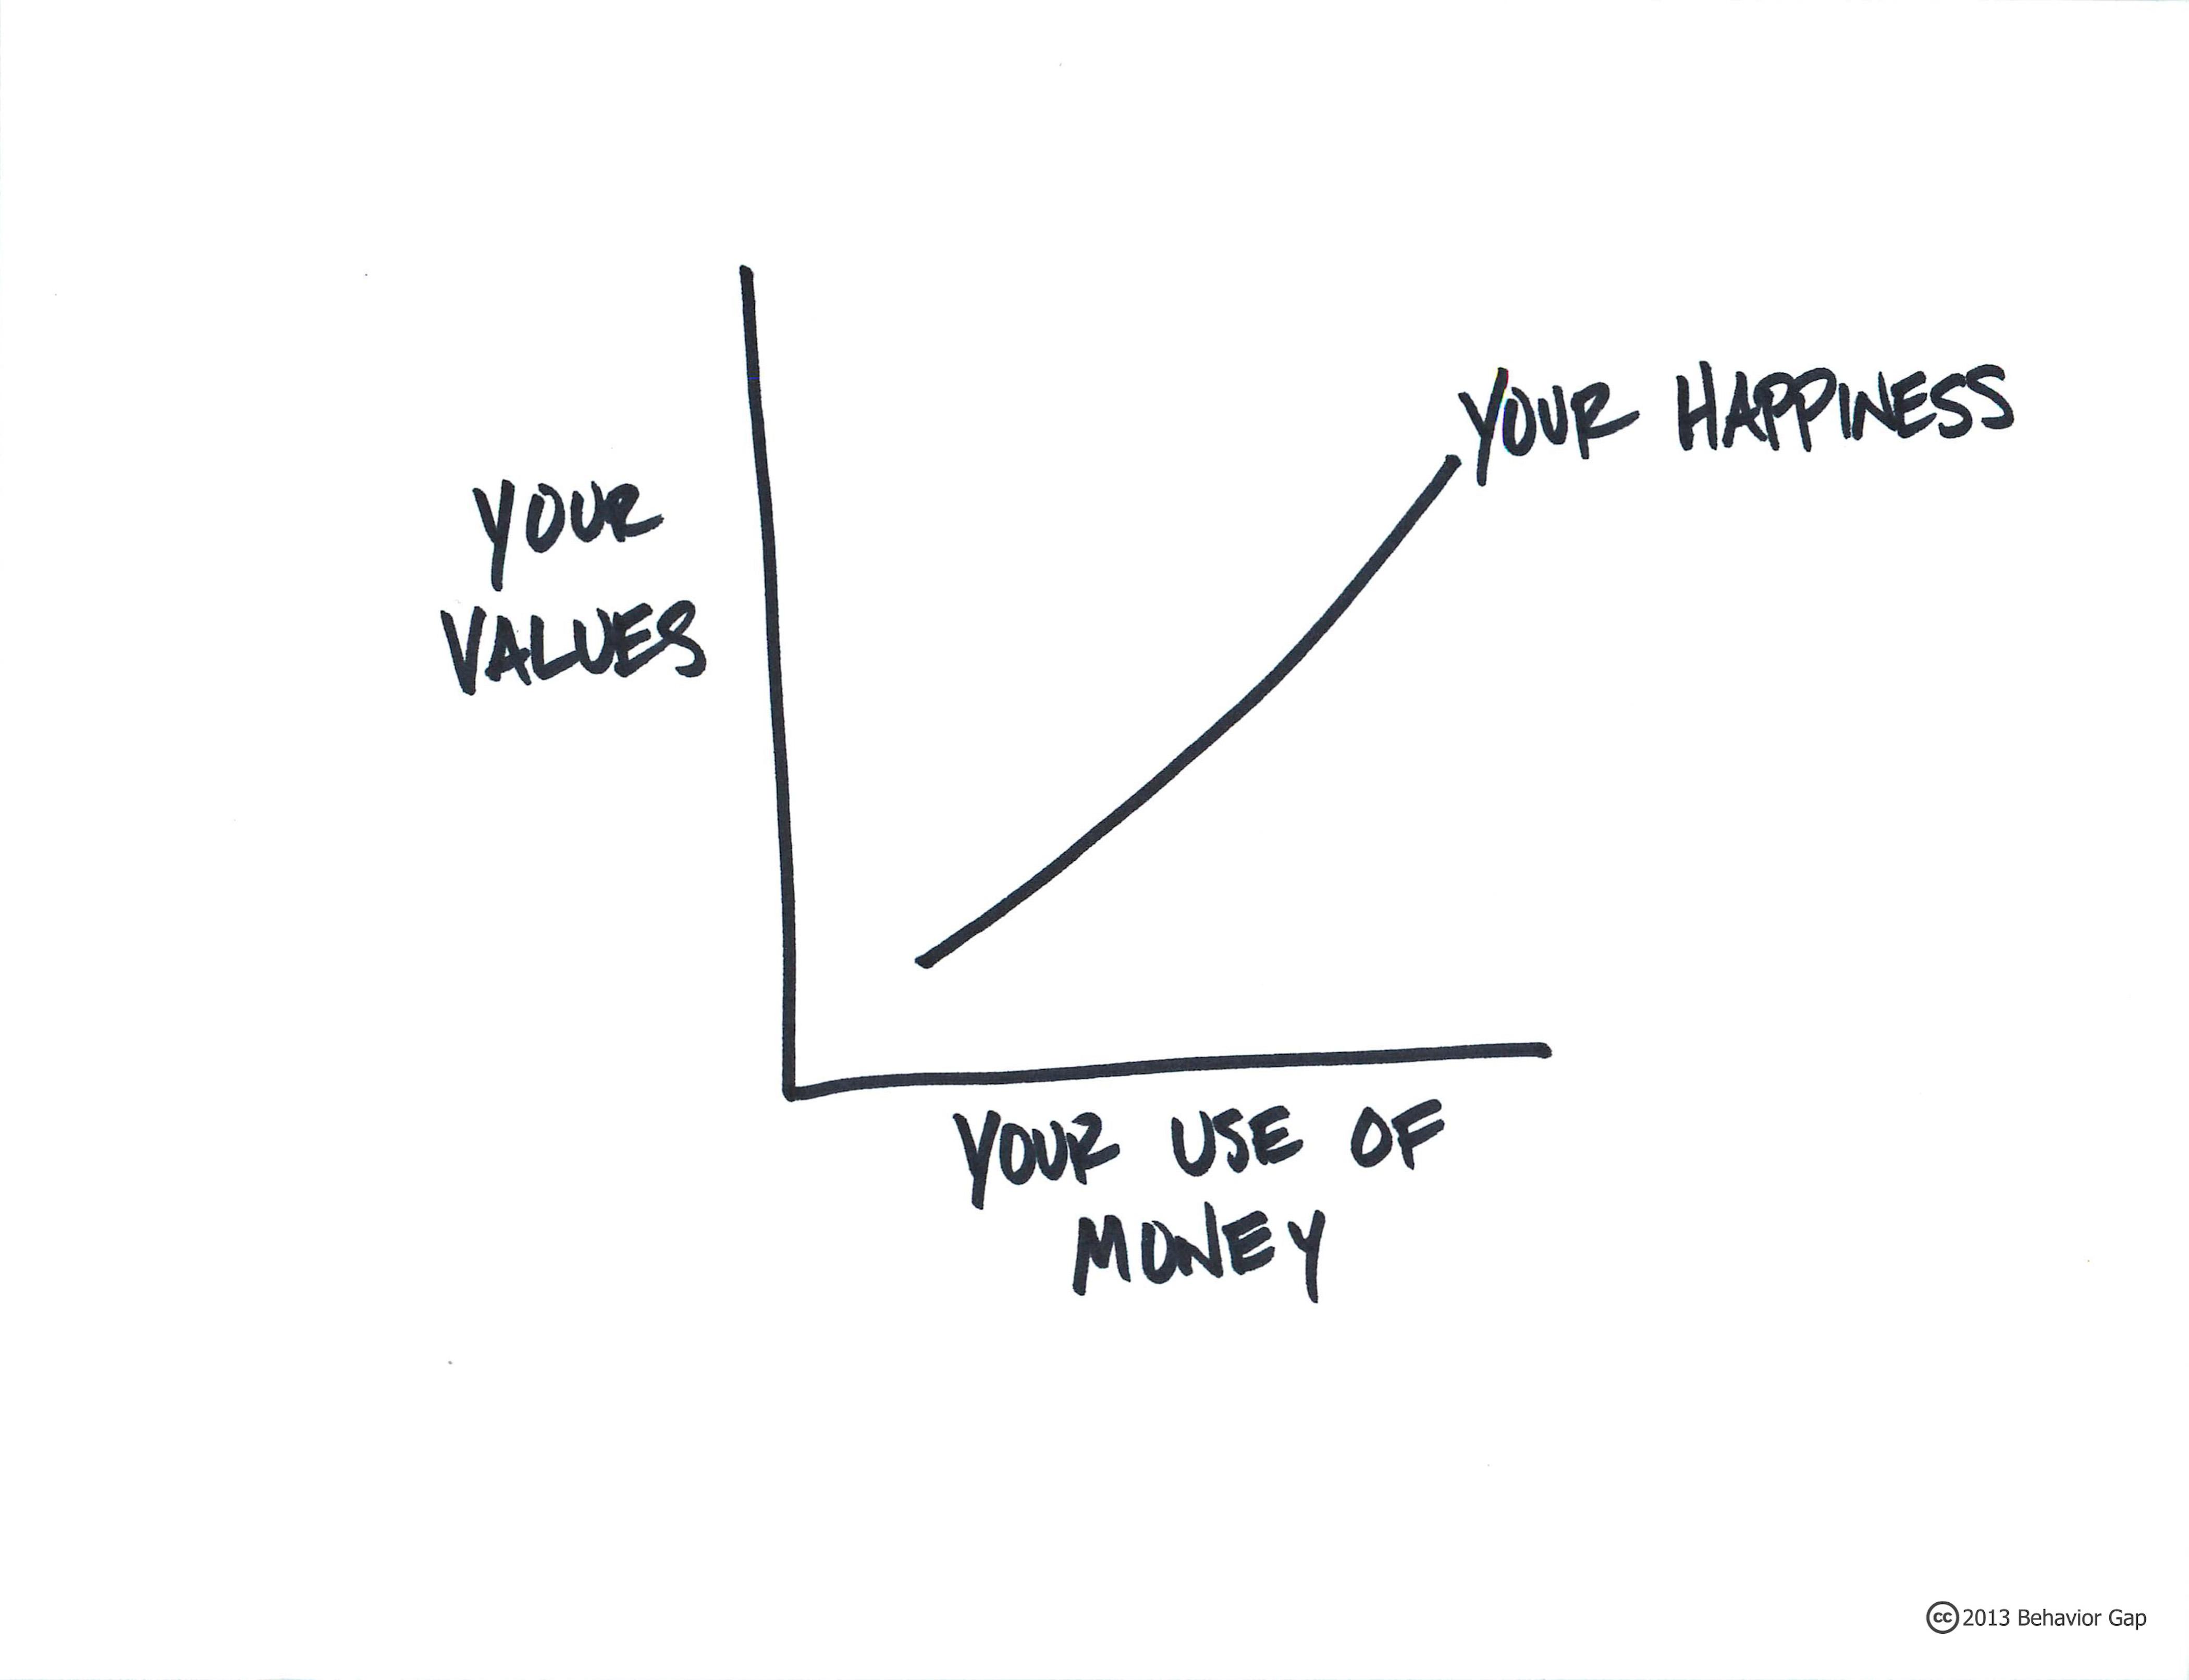 An age old question, can money buy happiness?